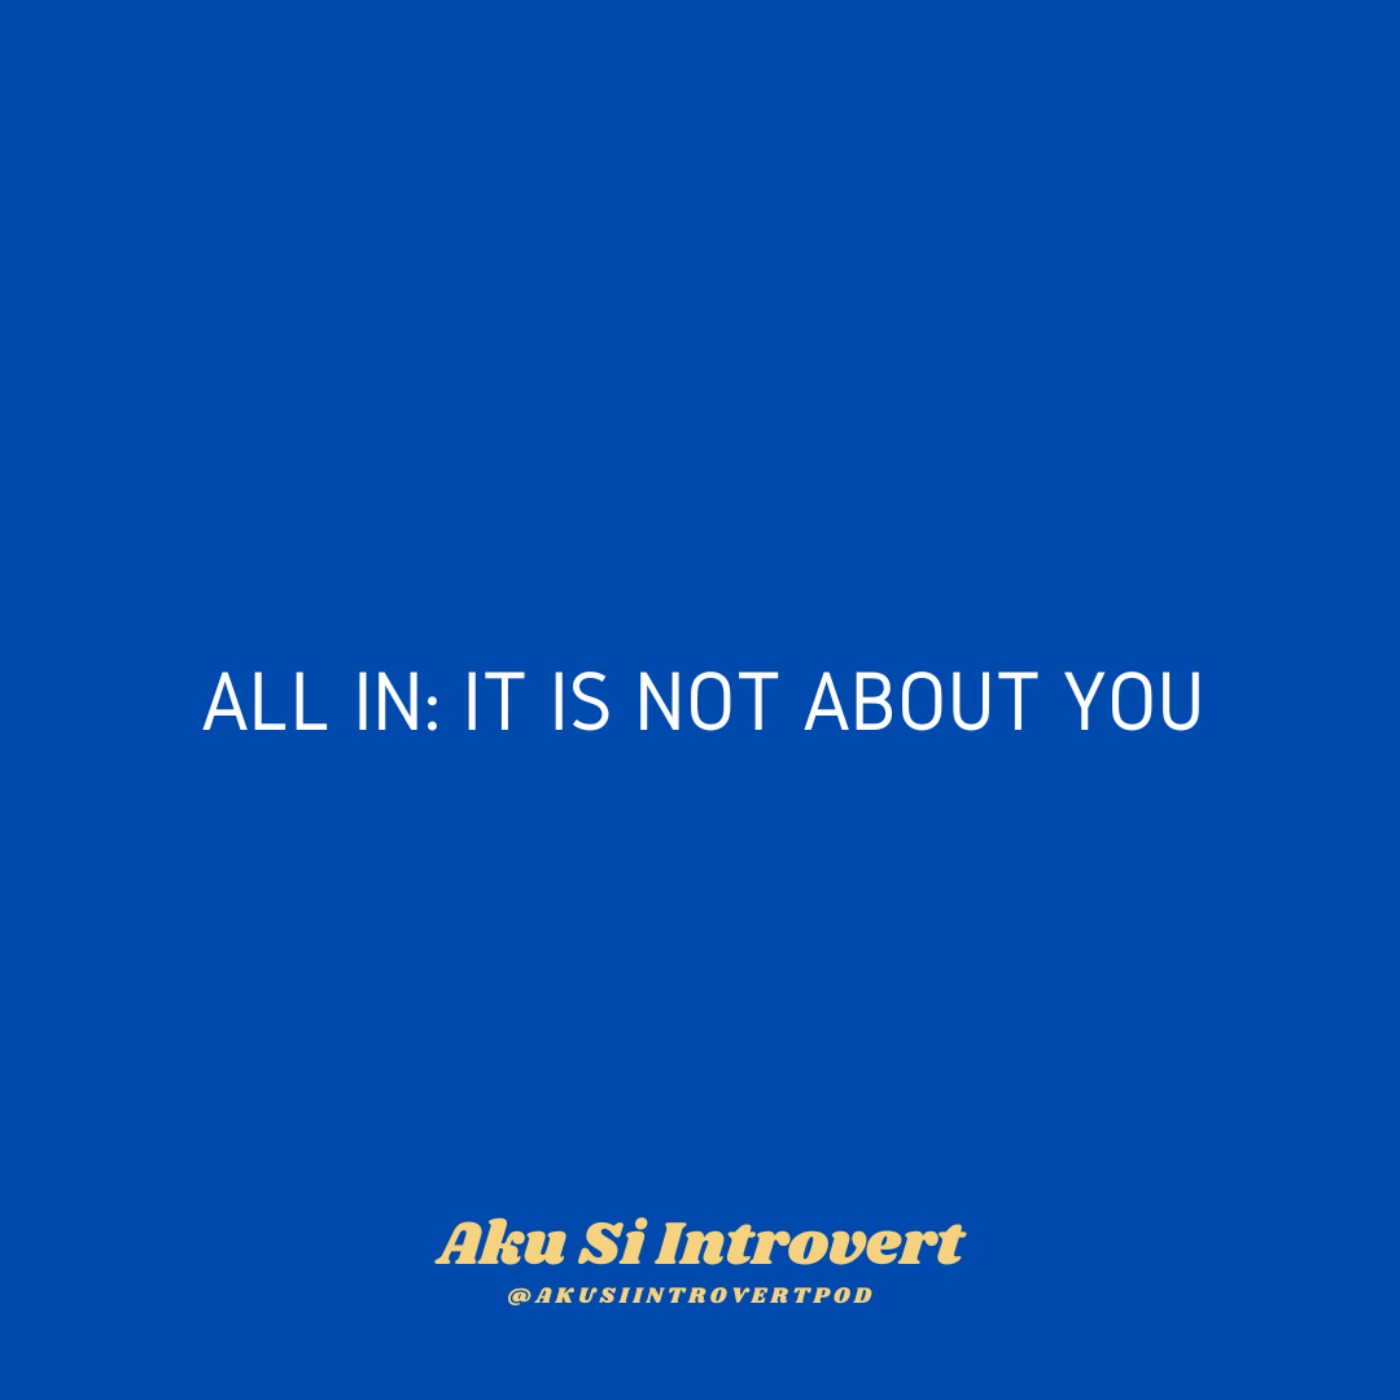 All In: It Is Not About You